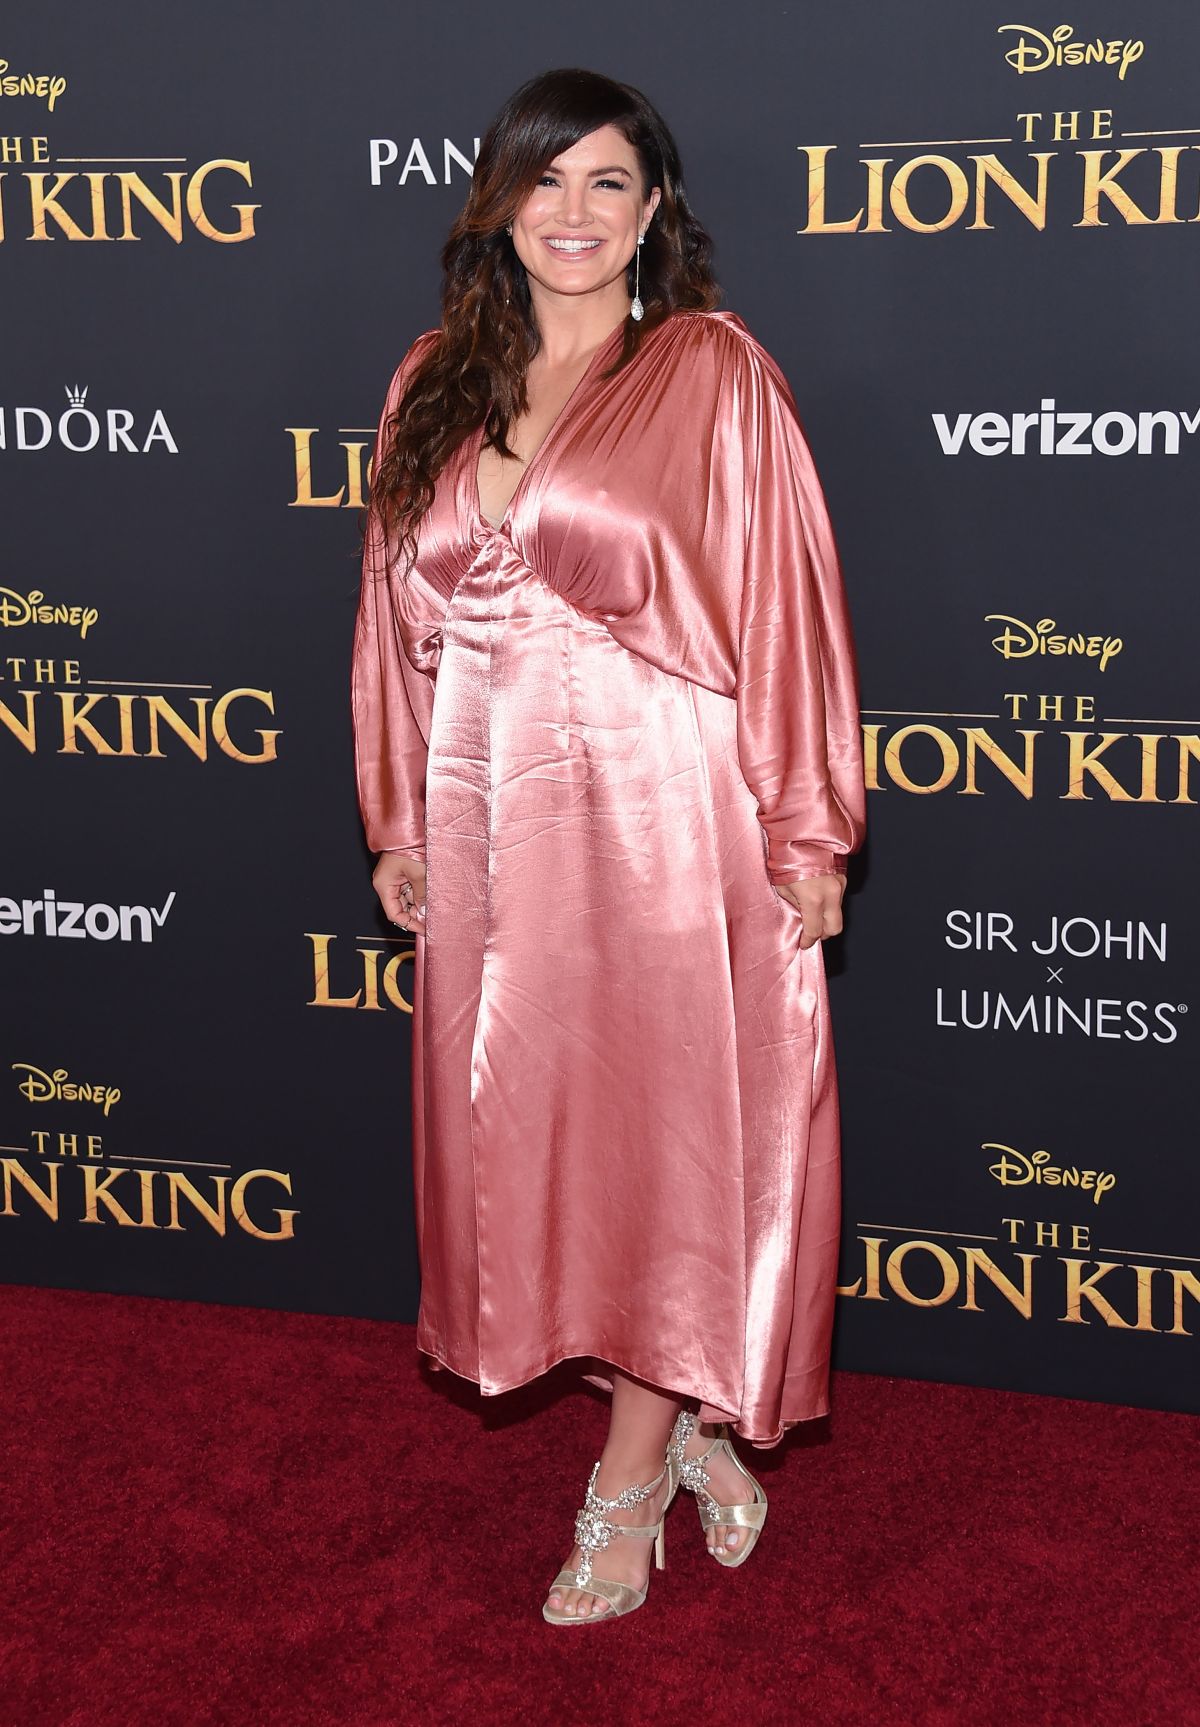 gina-carano-at-the-lion-king-premiere-in-hollywood-07-09-2019-9.jpg